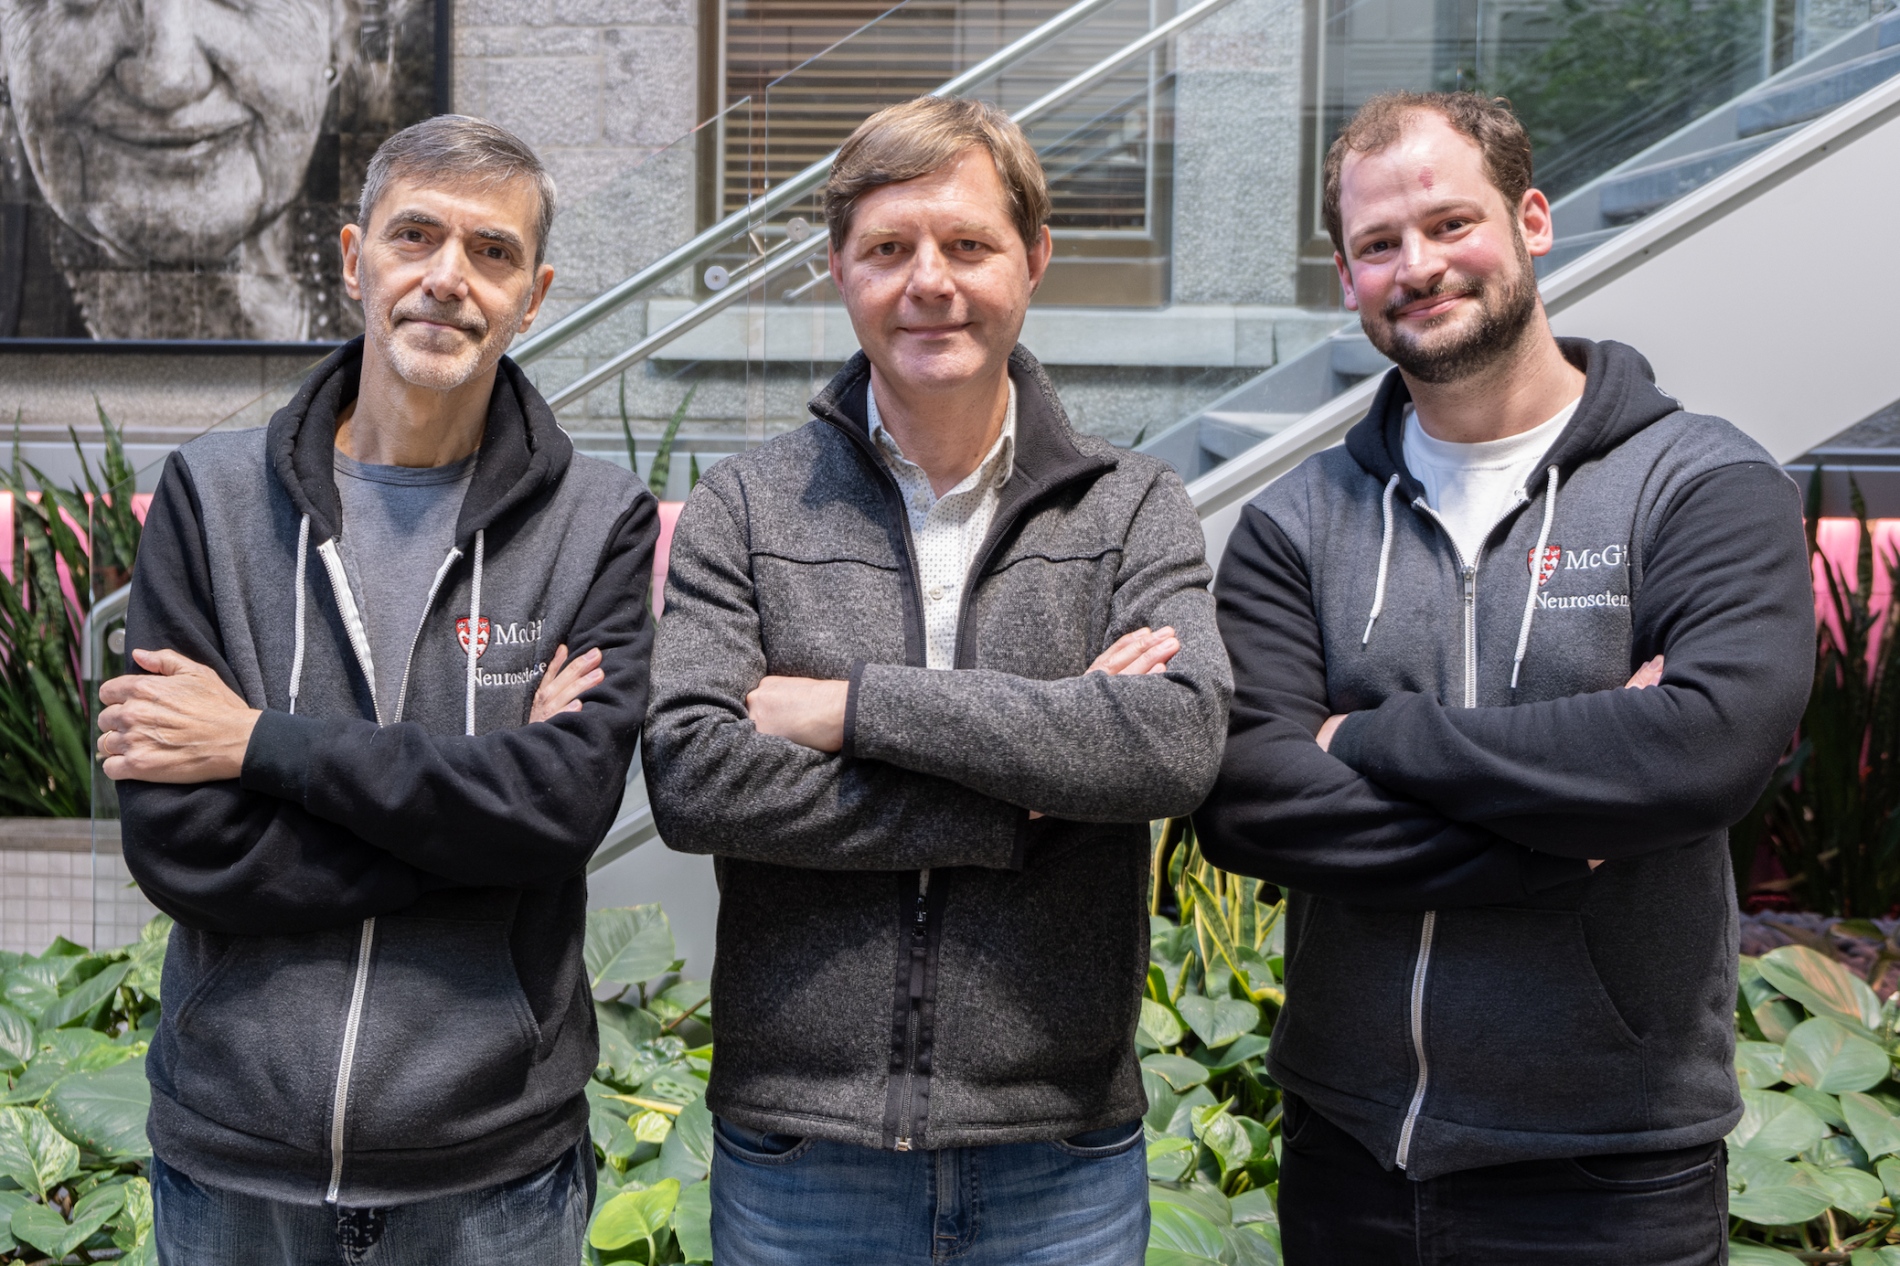 From left to right: Ariel Ase, PhD, Research Associate (Co-inventor IP), Philippe Séguéla, PhD, Full Professor in the Department of Neurology and Neurosurgery at McGill (Project lead) and Jonas Friard, PhD, Postdoctoral Researcher. 